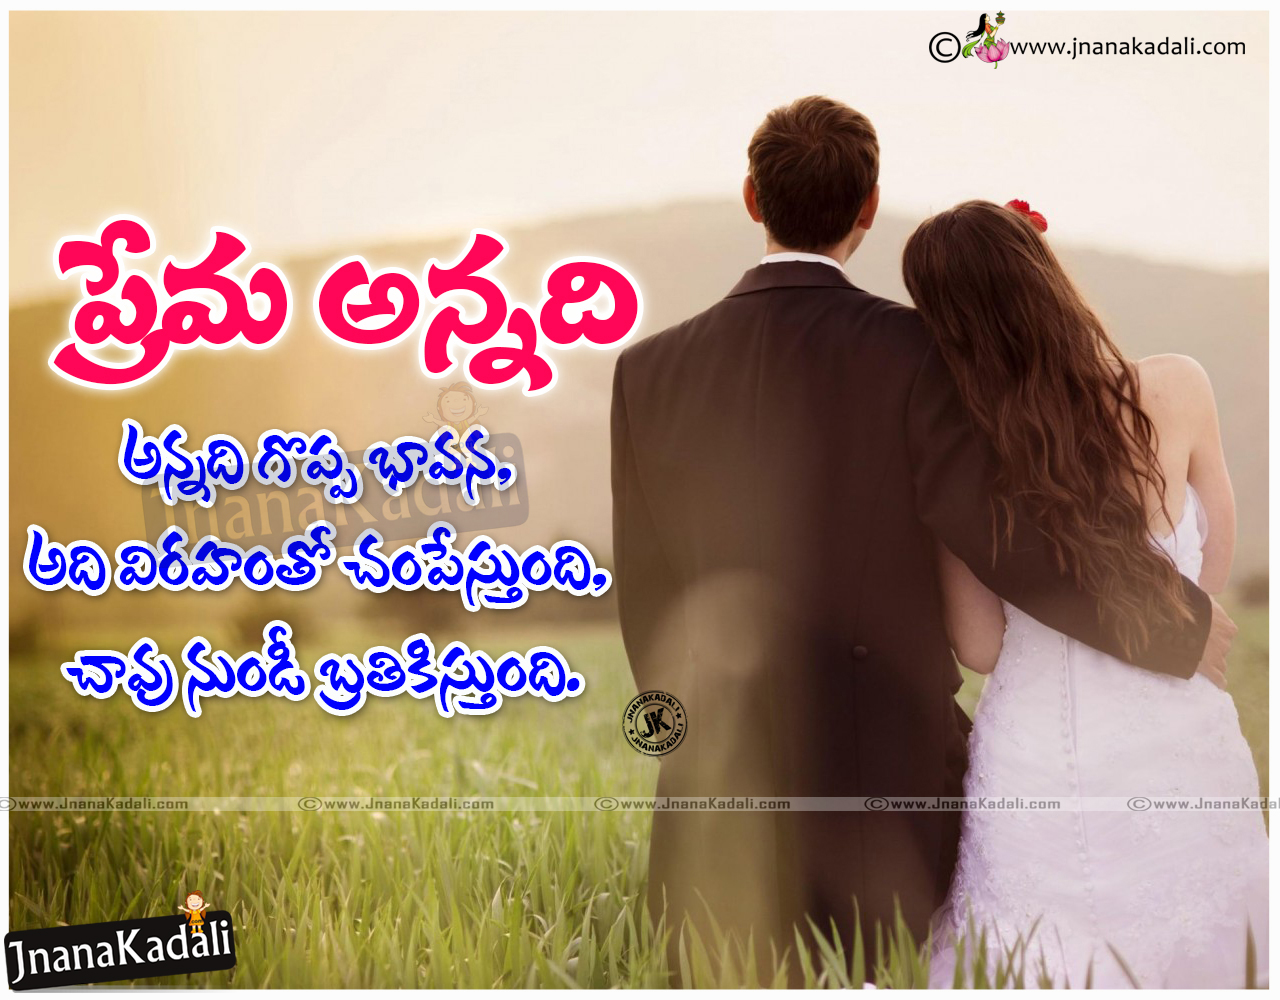 Telugu Heart Touching Love Sayings & Quotations Messages | JNANA ...